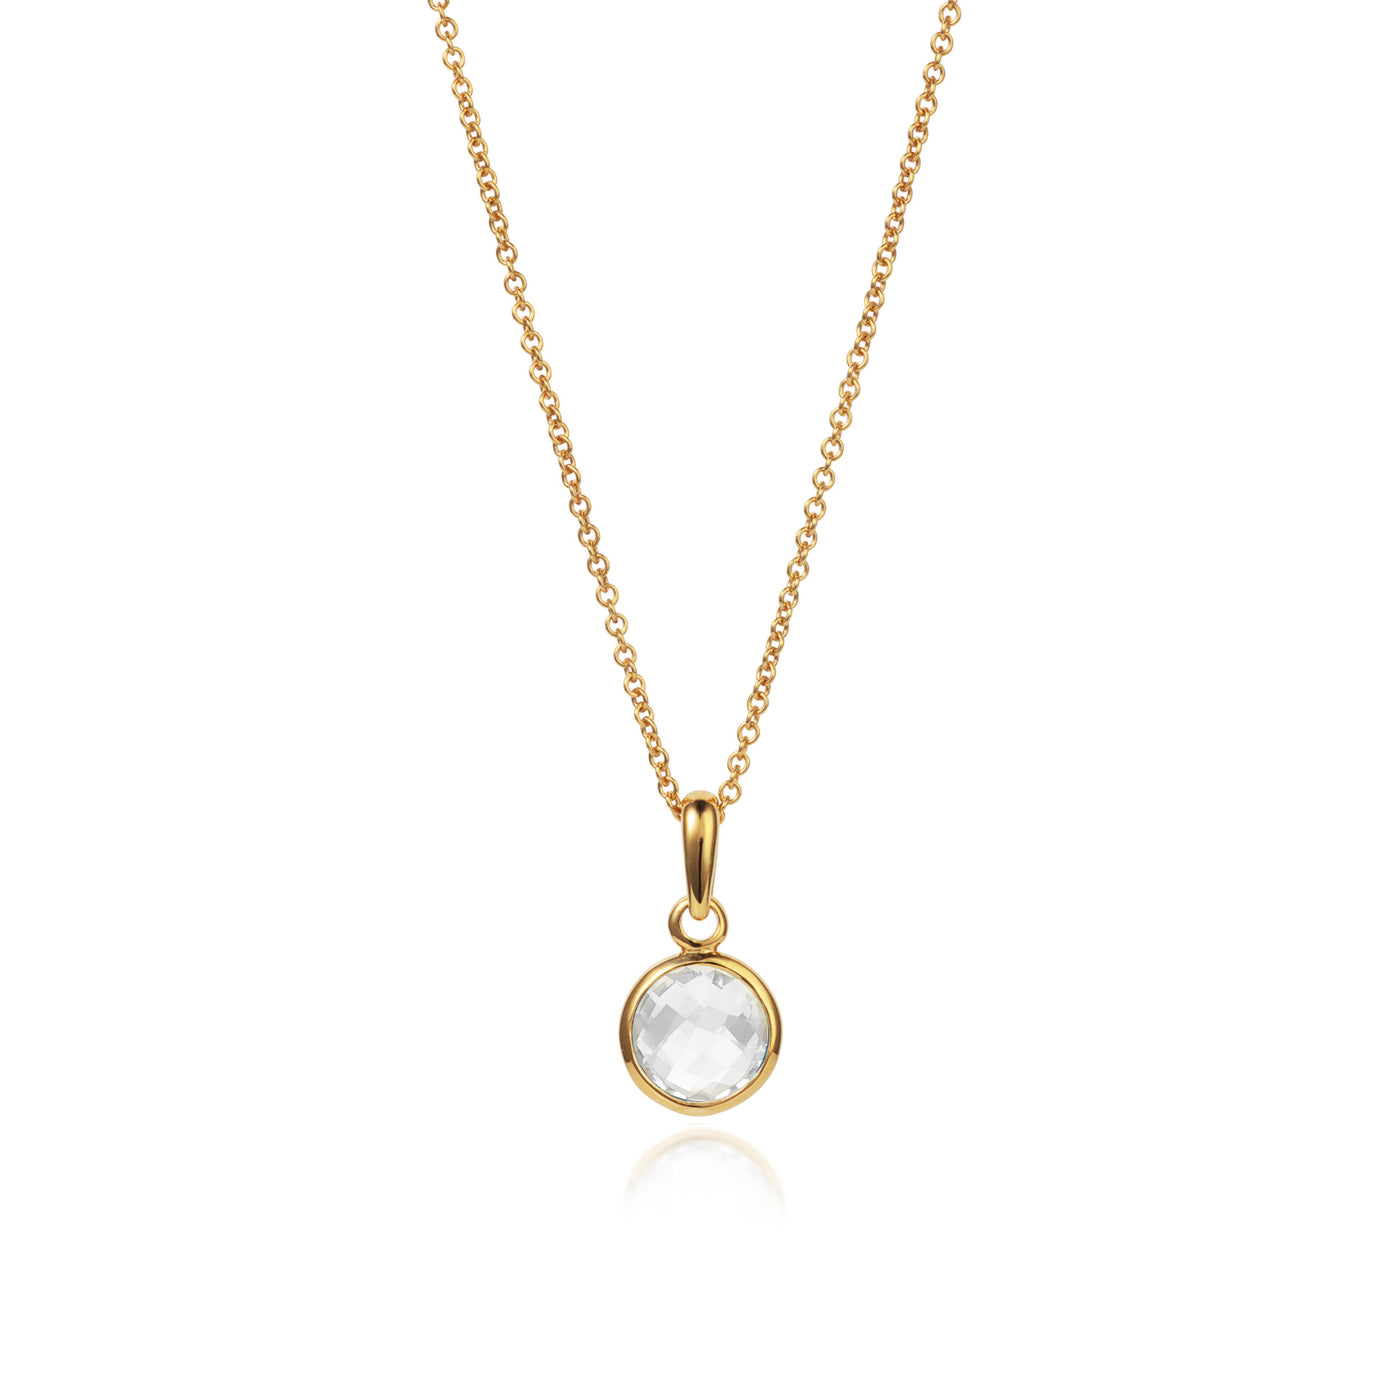 April Birthstone Necklace in White Topaz and Gold